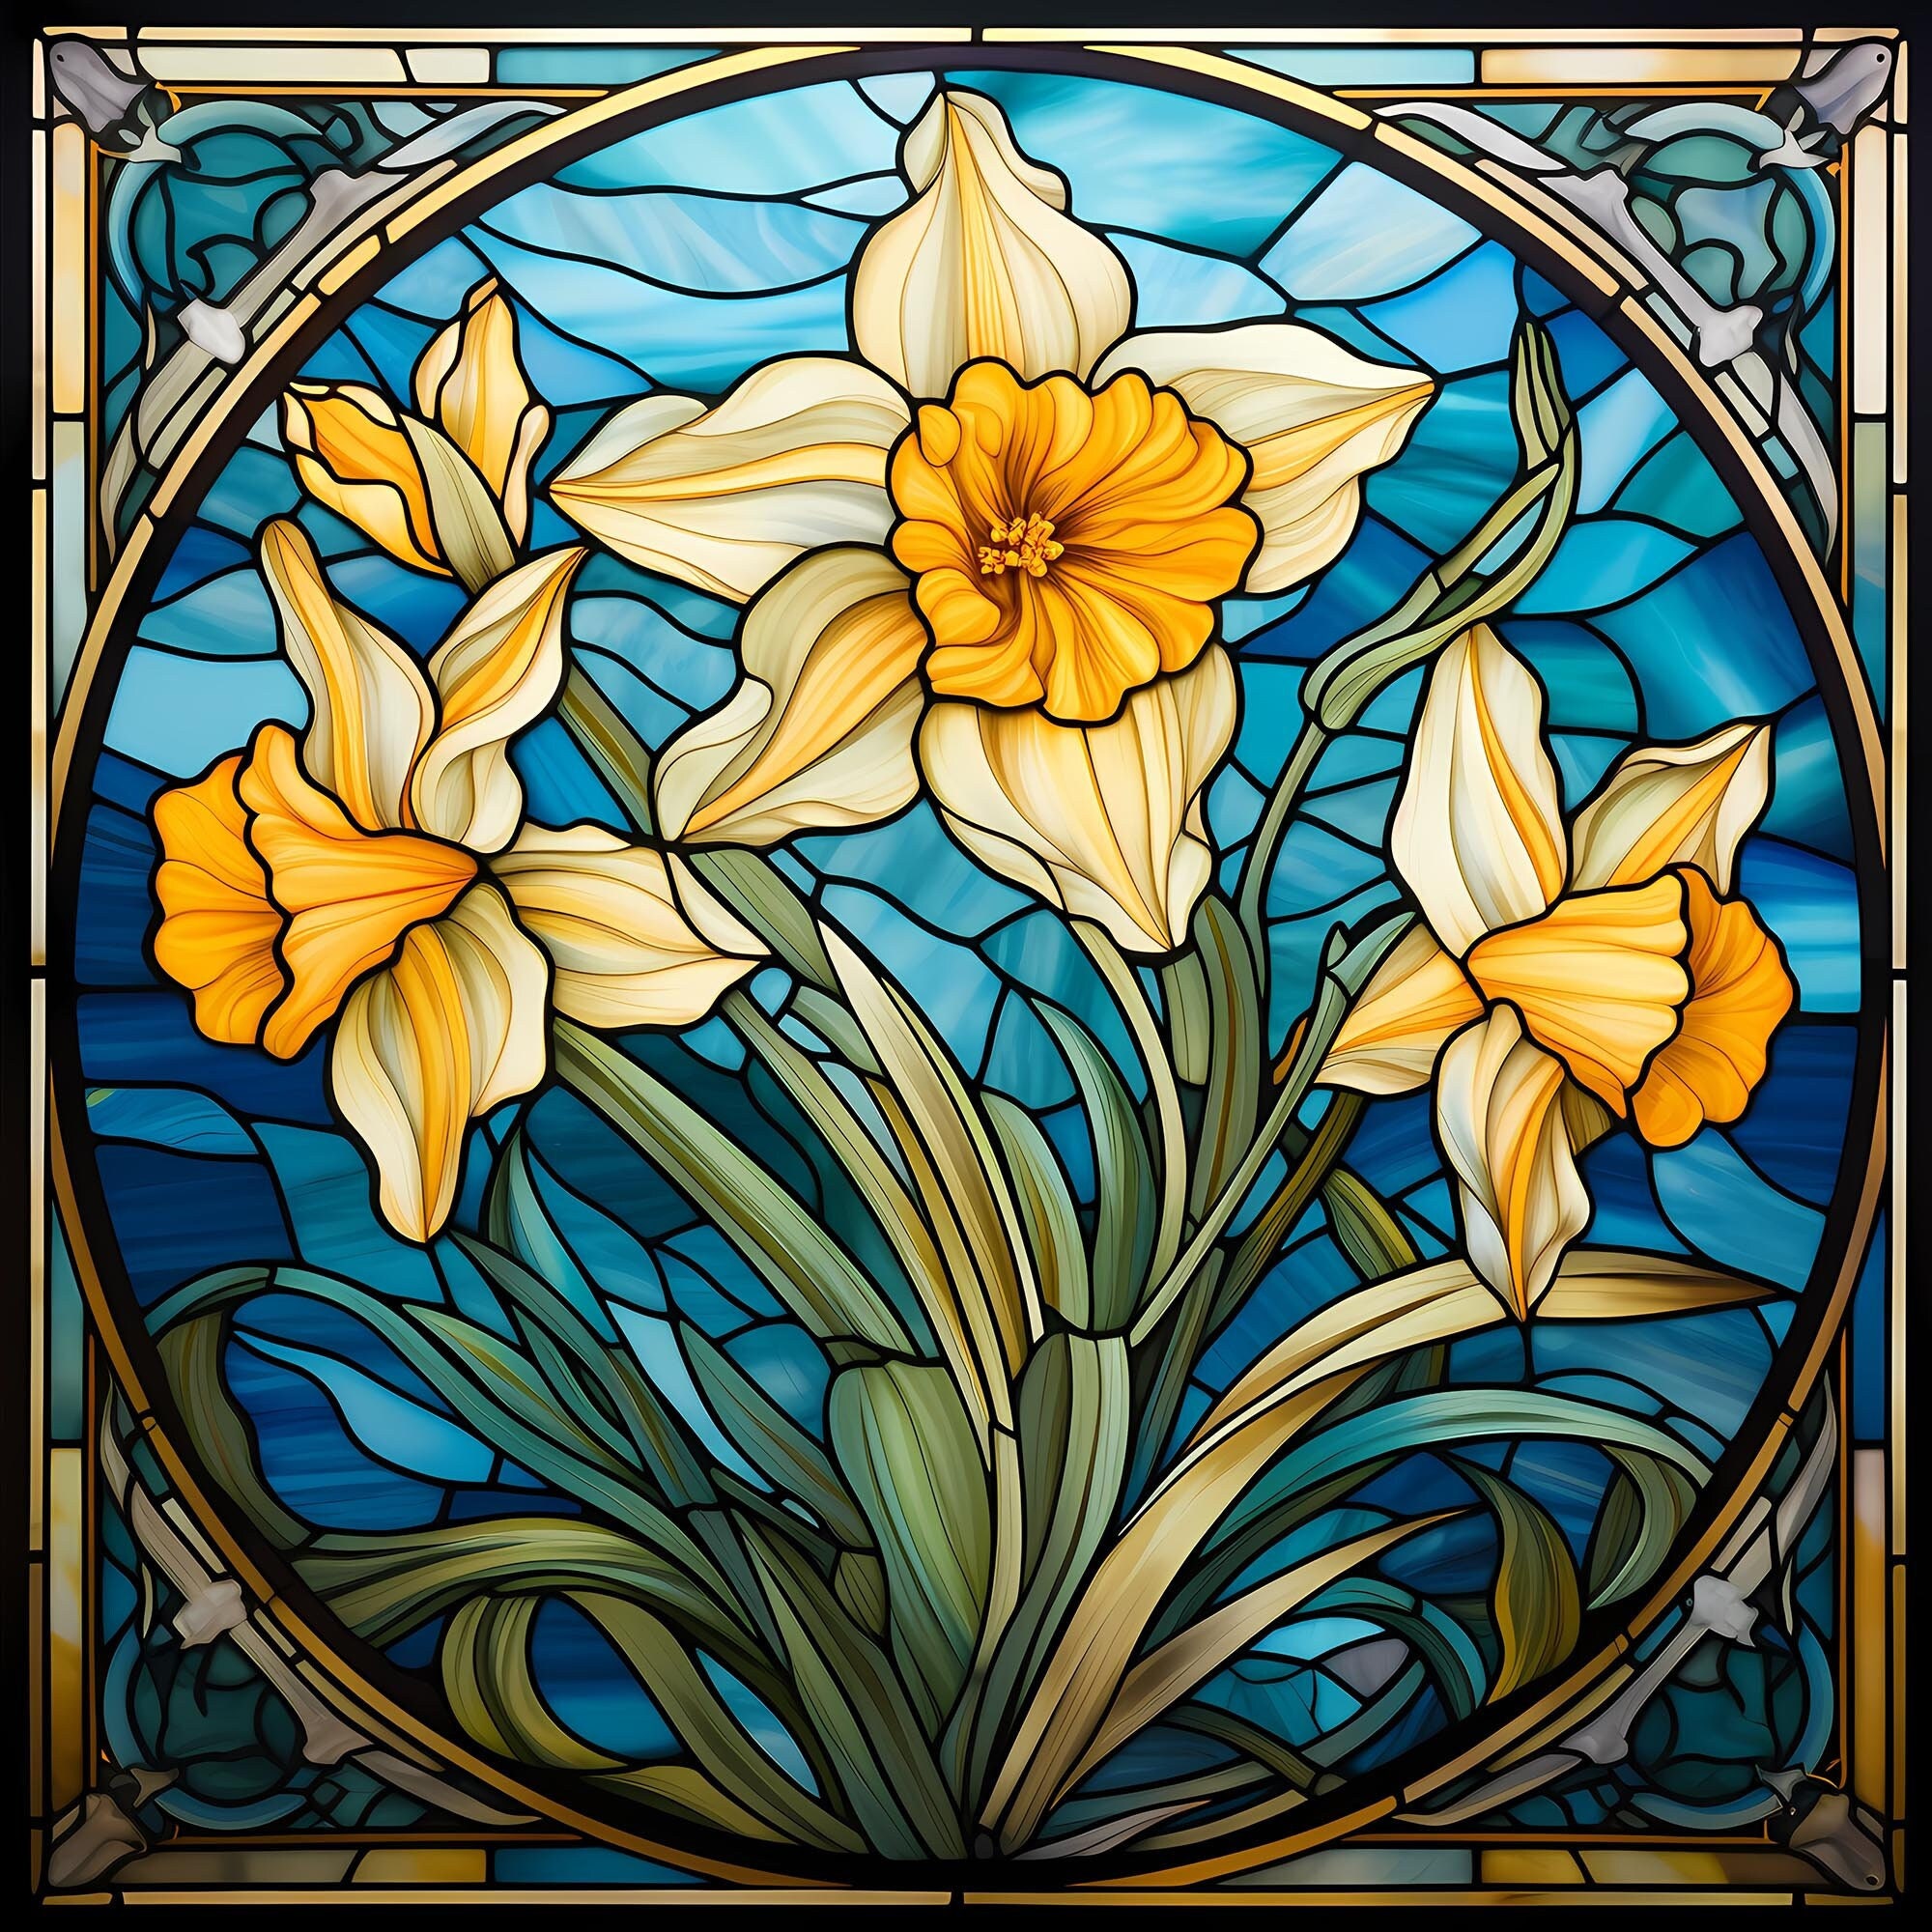 Daffodils 11x9 Glass Painting Sun Catcher Stained Glass Glass Art